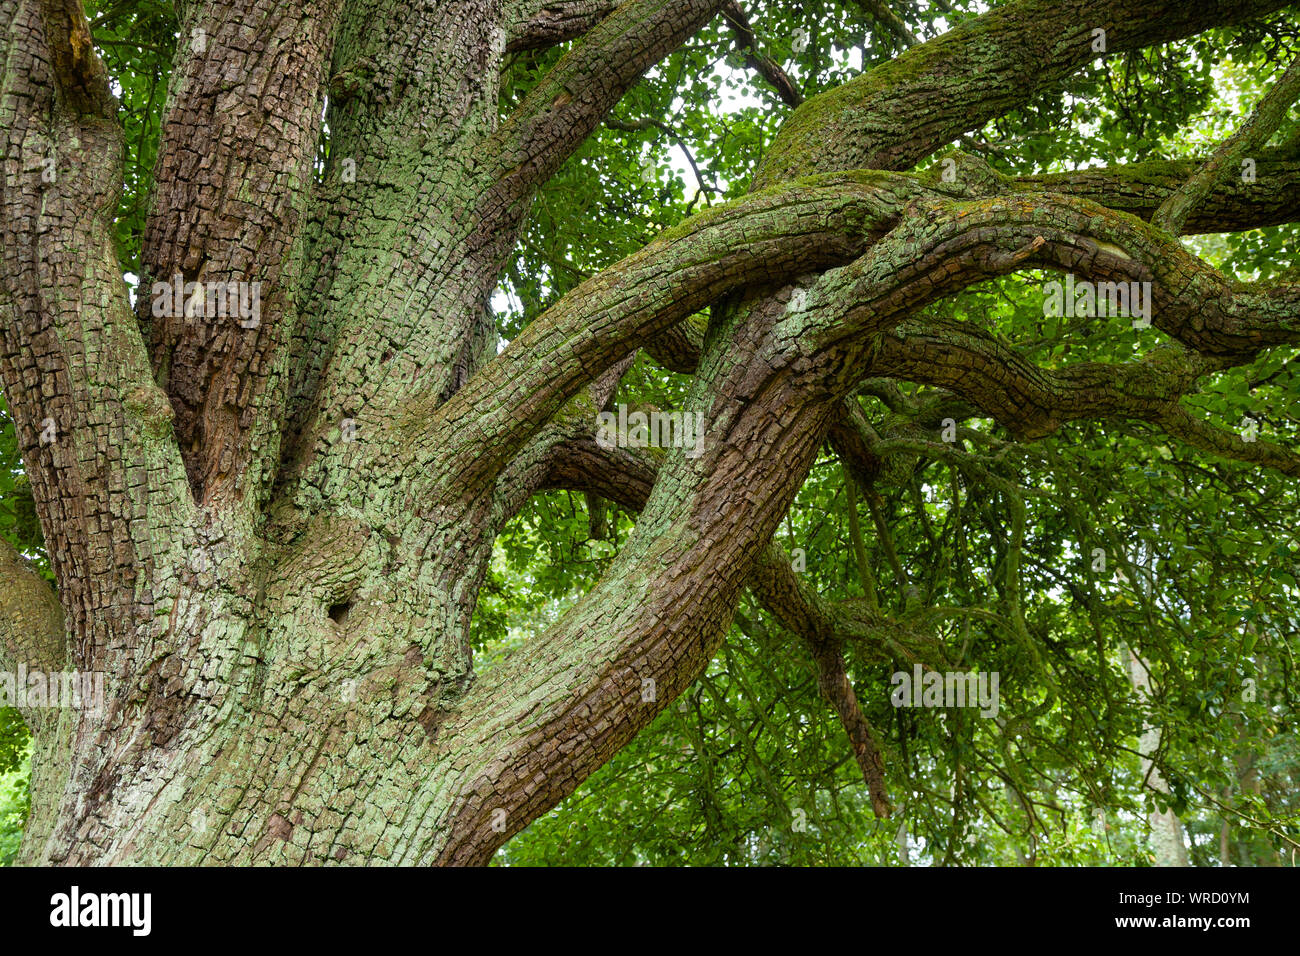 Twisted textured tree branches in Scotland. Stock Photo